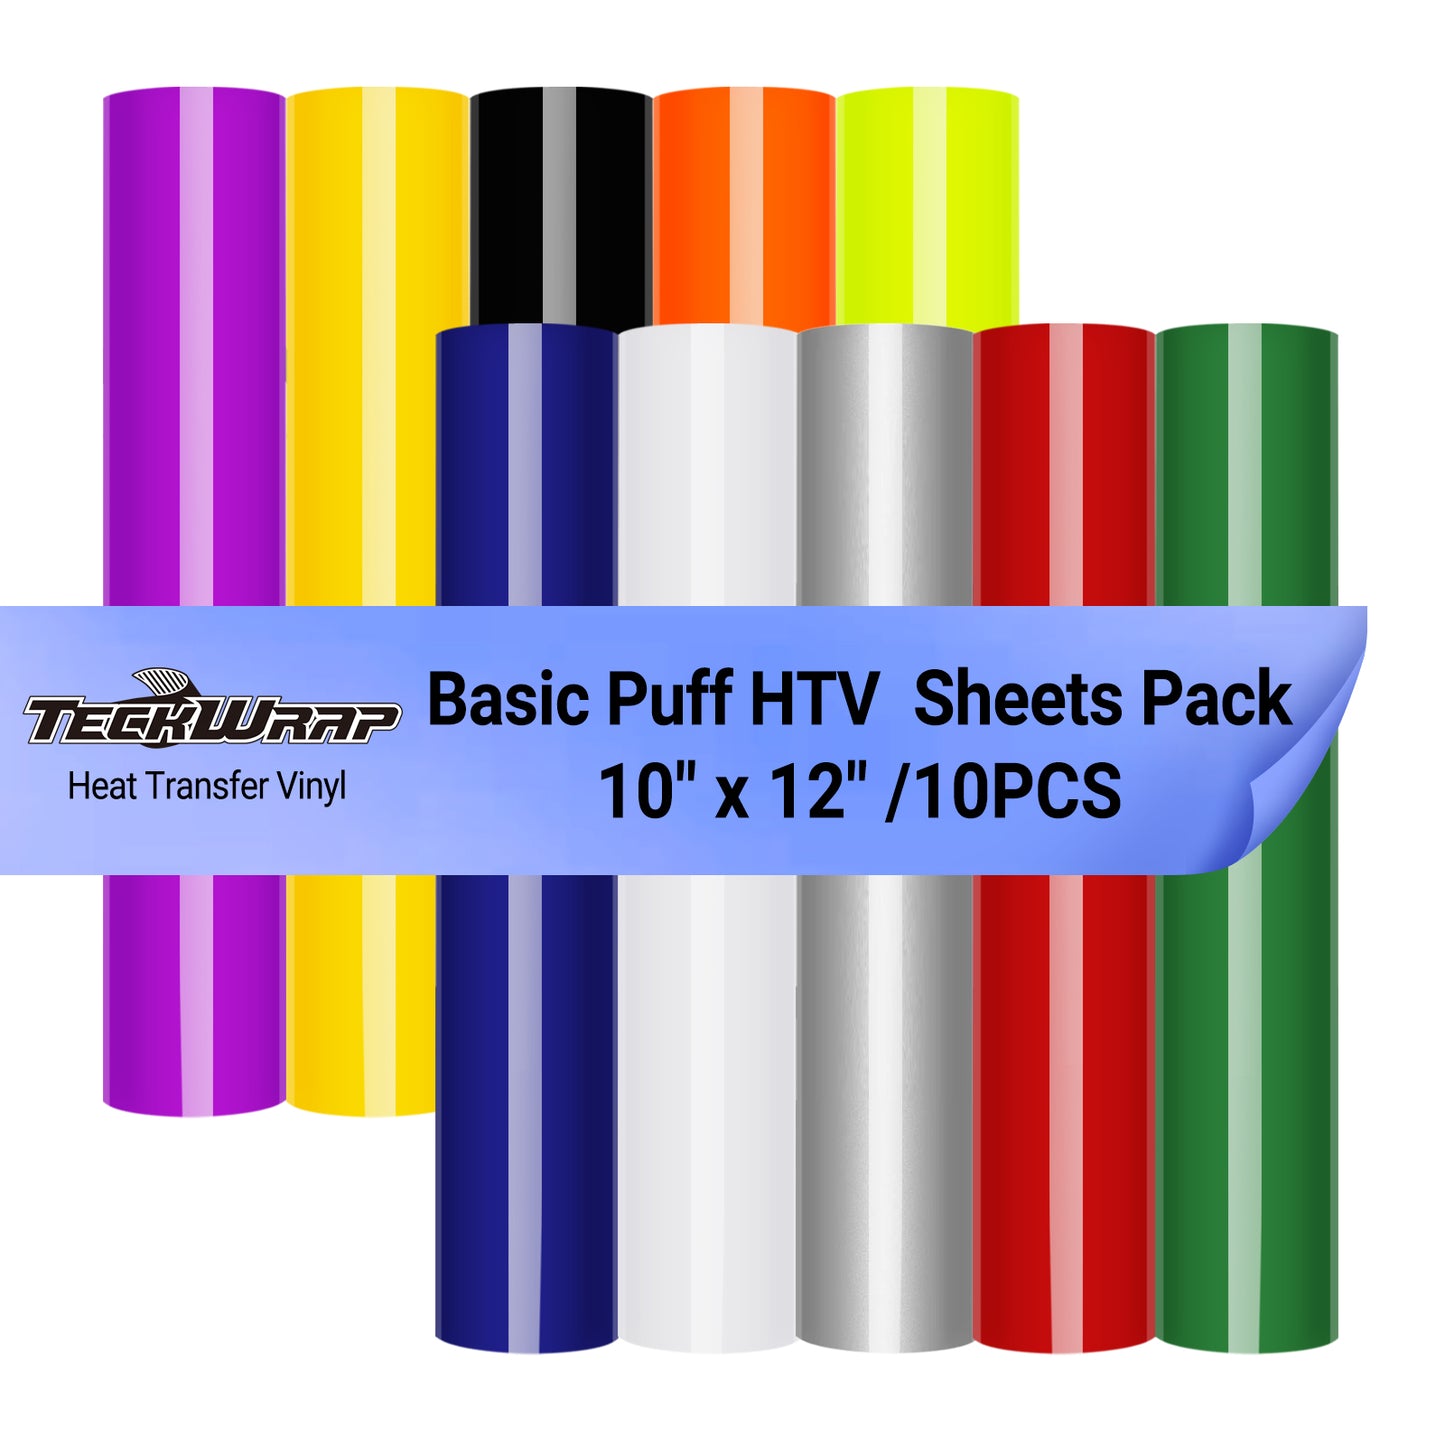 Puff HTV Sheets Pack